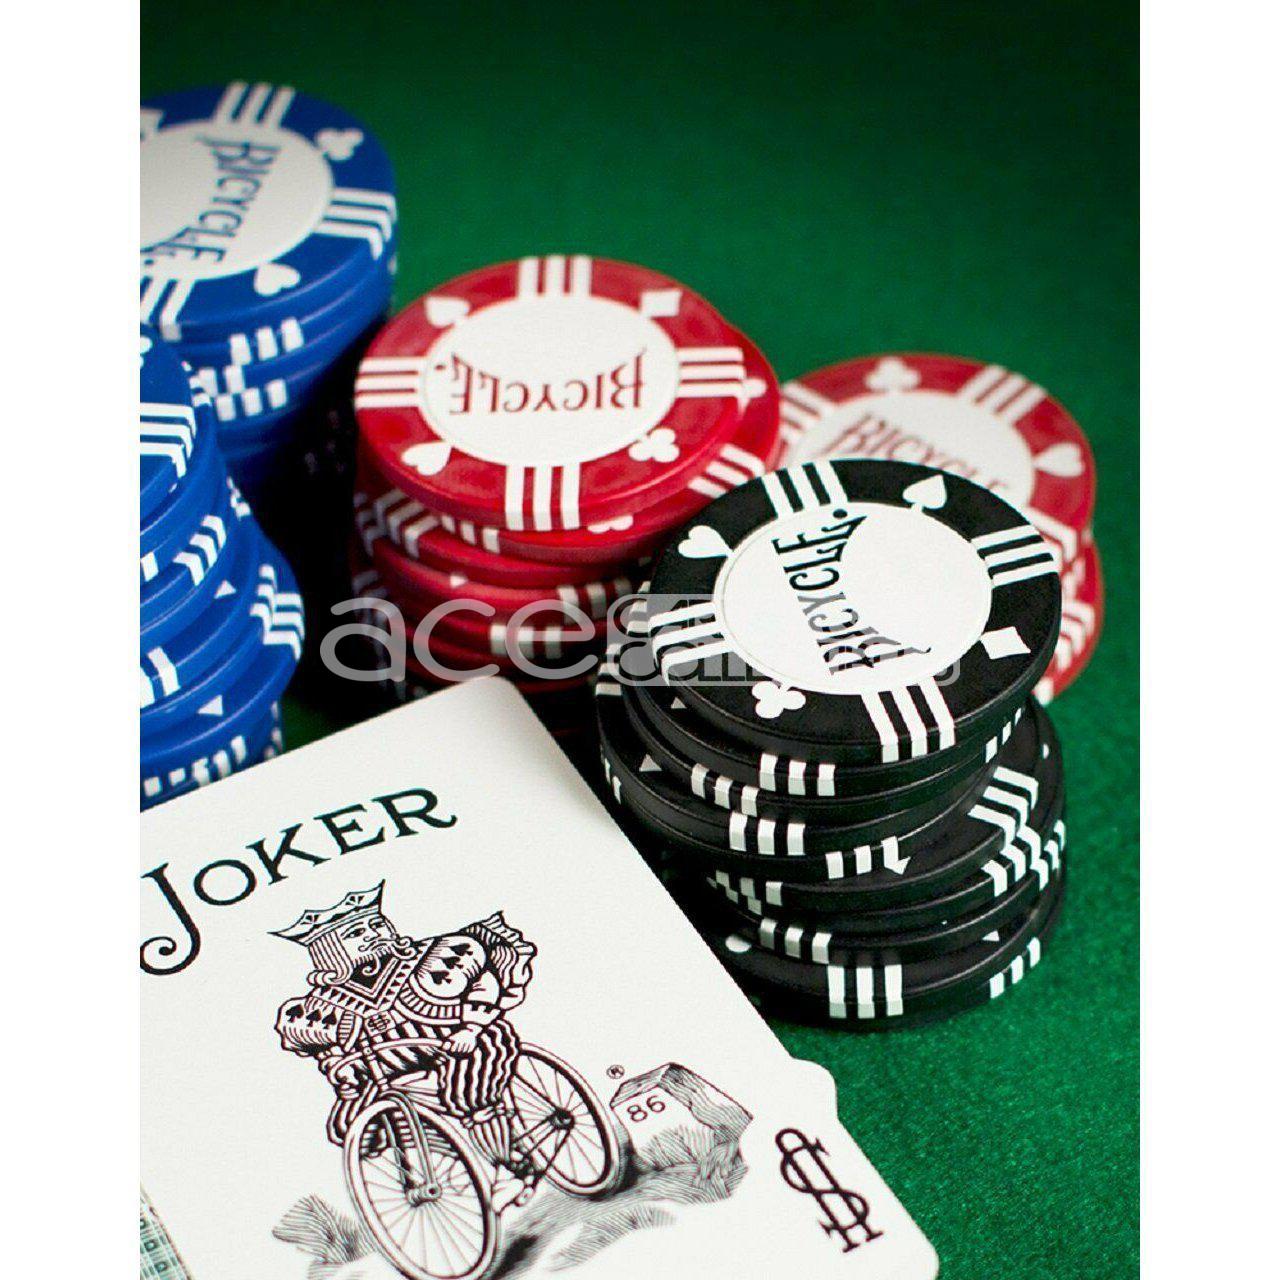 Bicycle Clay Poker Chips Filled 8 Gram (50pcs)-United States Playing Cards Company-Ace Cards & Collectibles